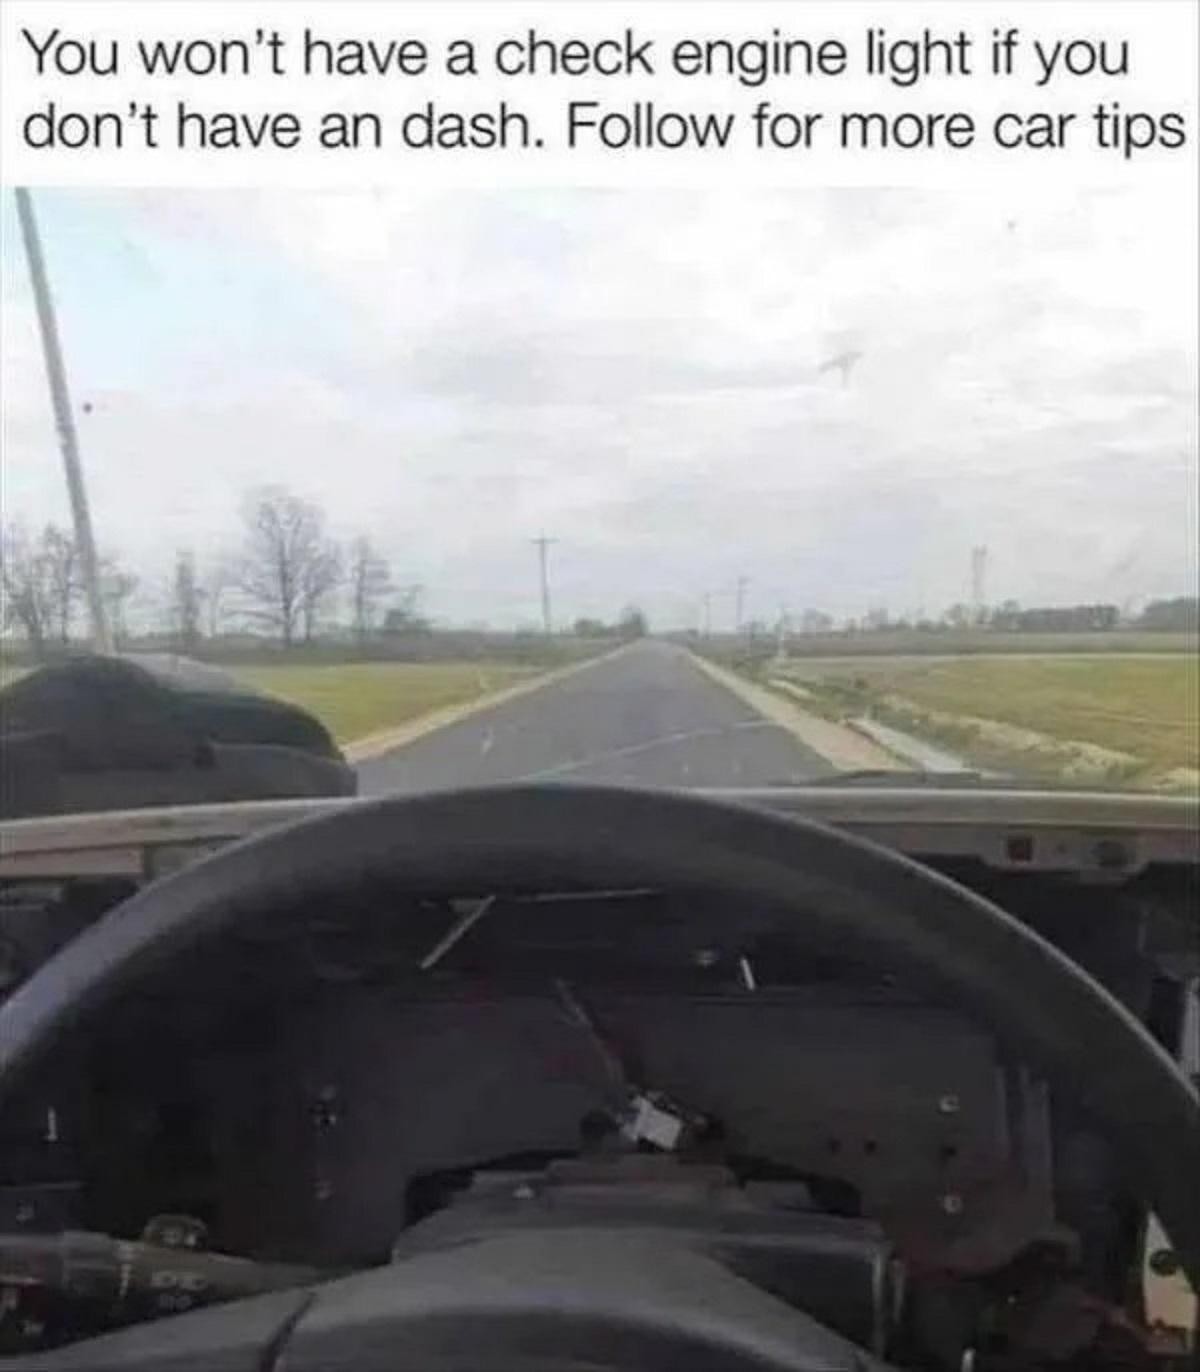 freeway - You won't have a check engine light if you don't have an dash. for more car tips.